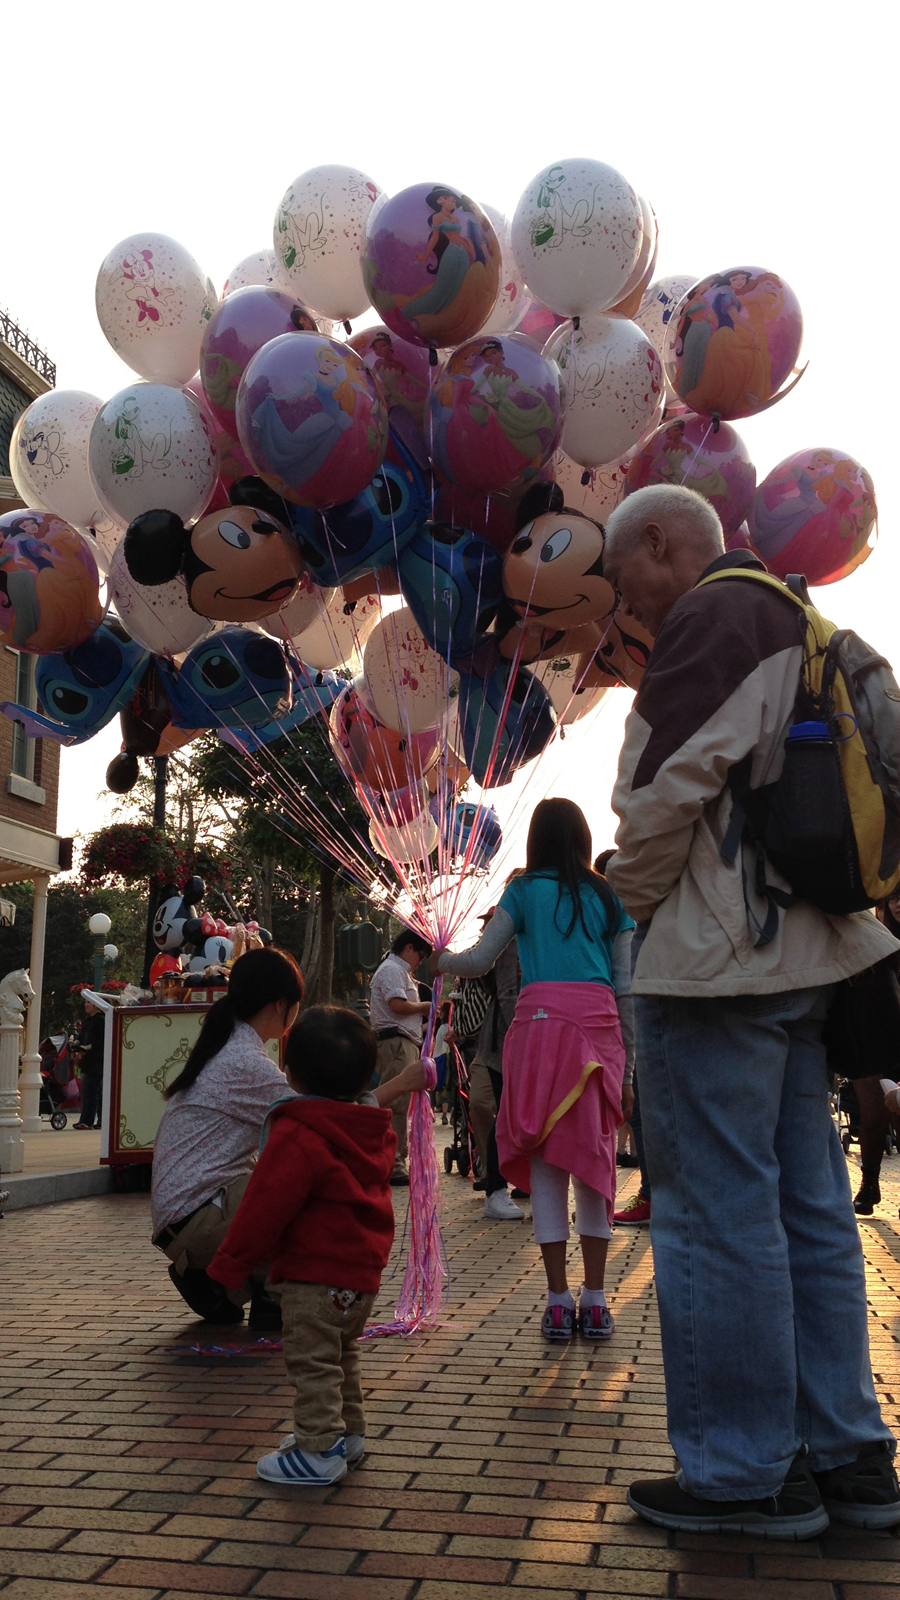 A toddler has fun with balloons at Hong Kong Disneyland. His grandfather would later look at me as I took a second photograph of the kid.